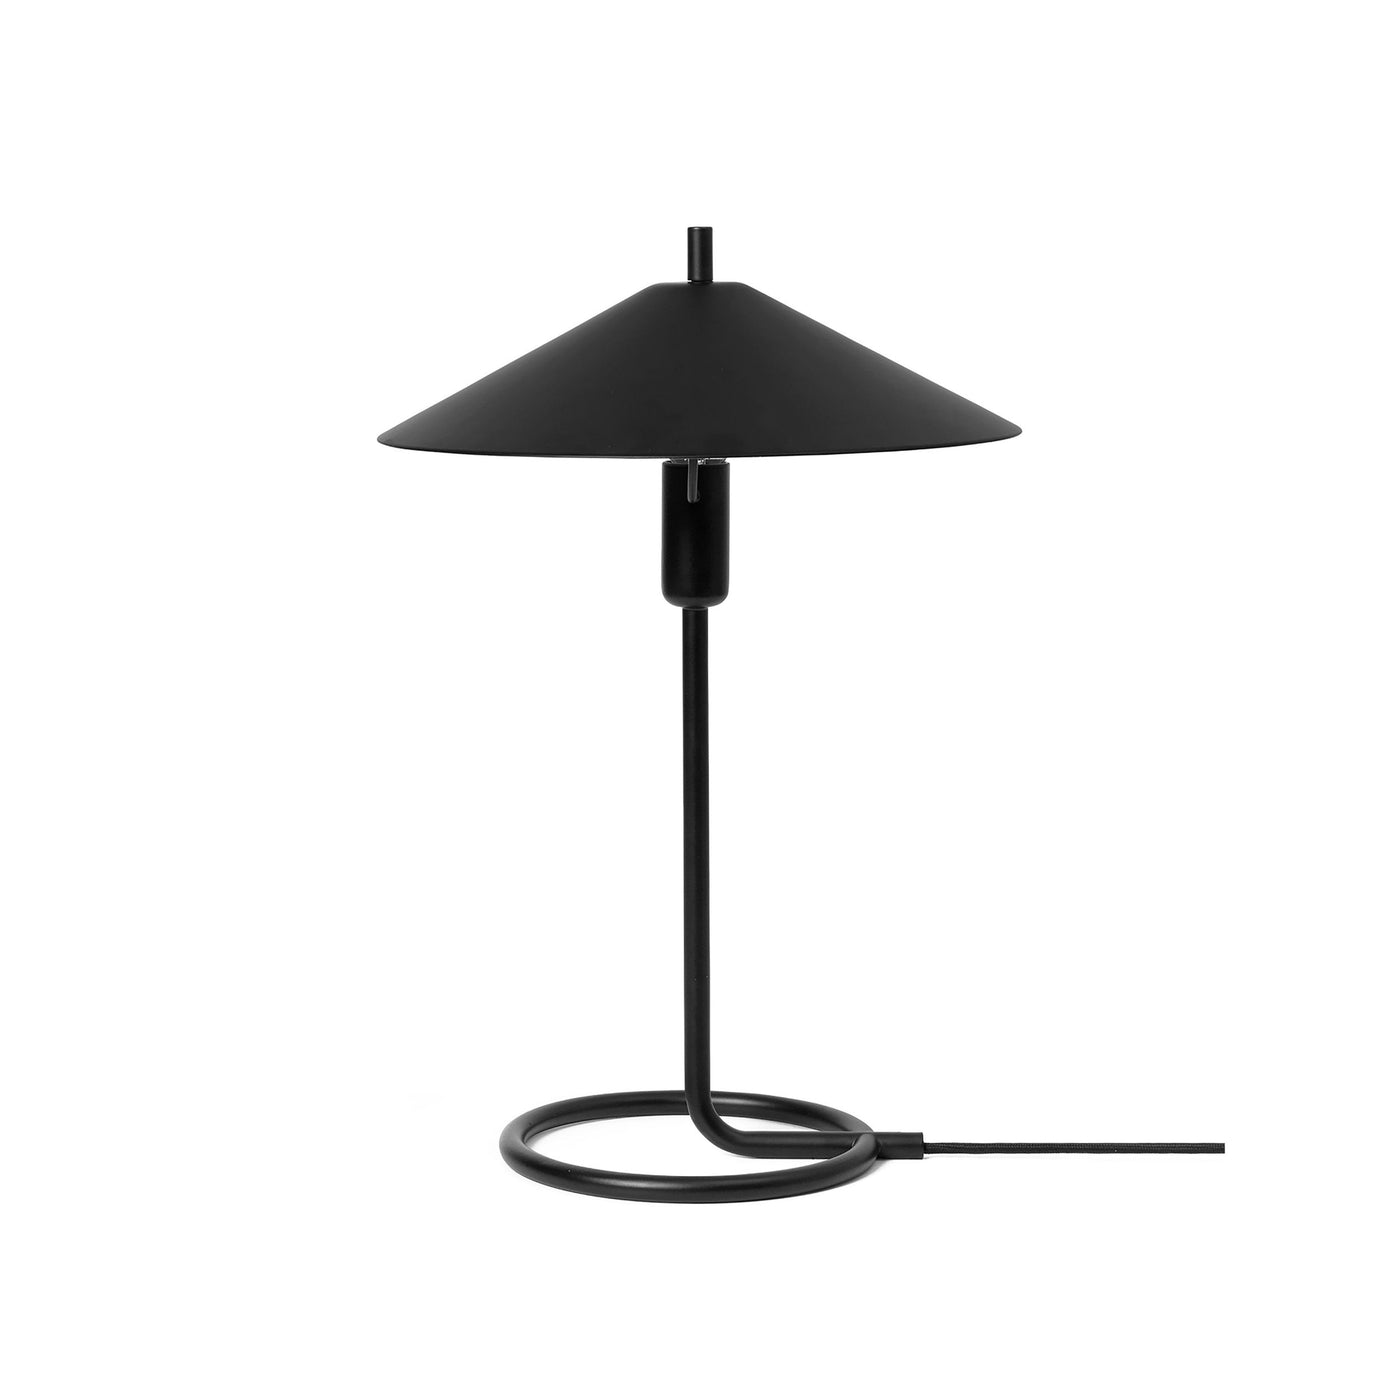 ferm LIVING Filo Table Lamp. Free UK delivery at someday designs. #shade_round